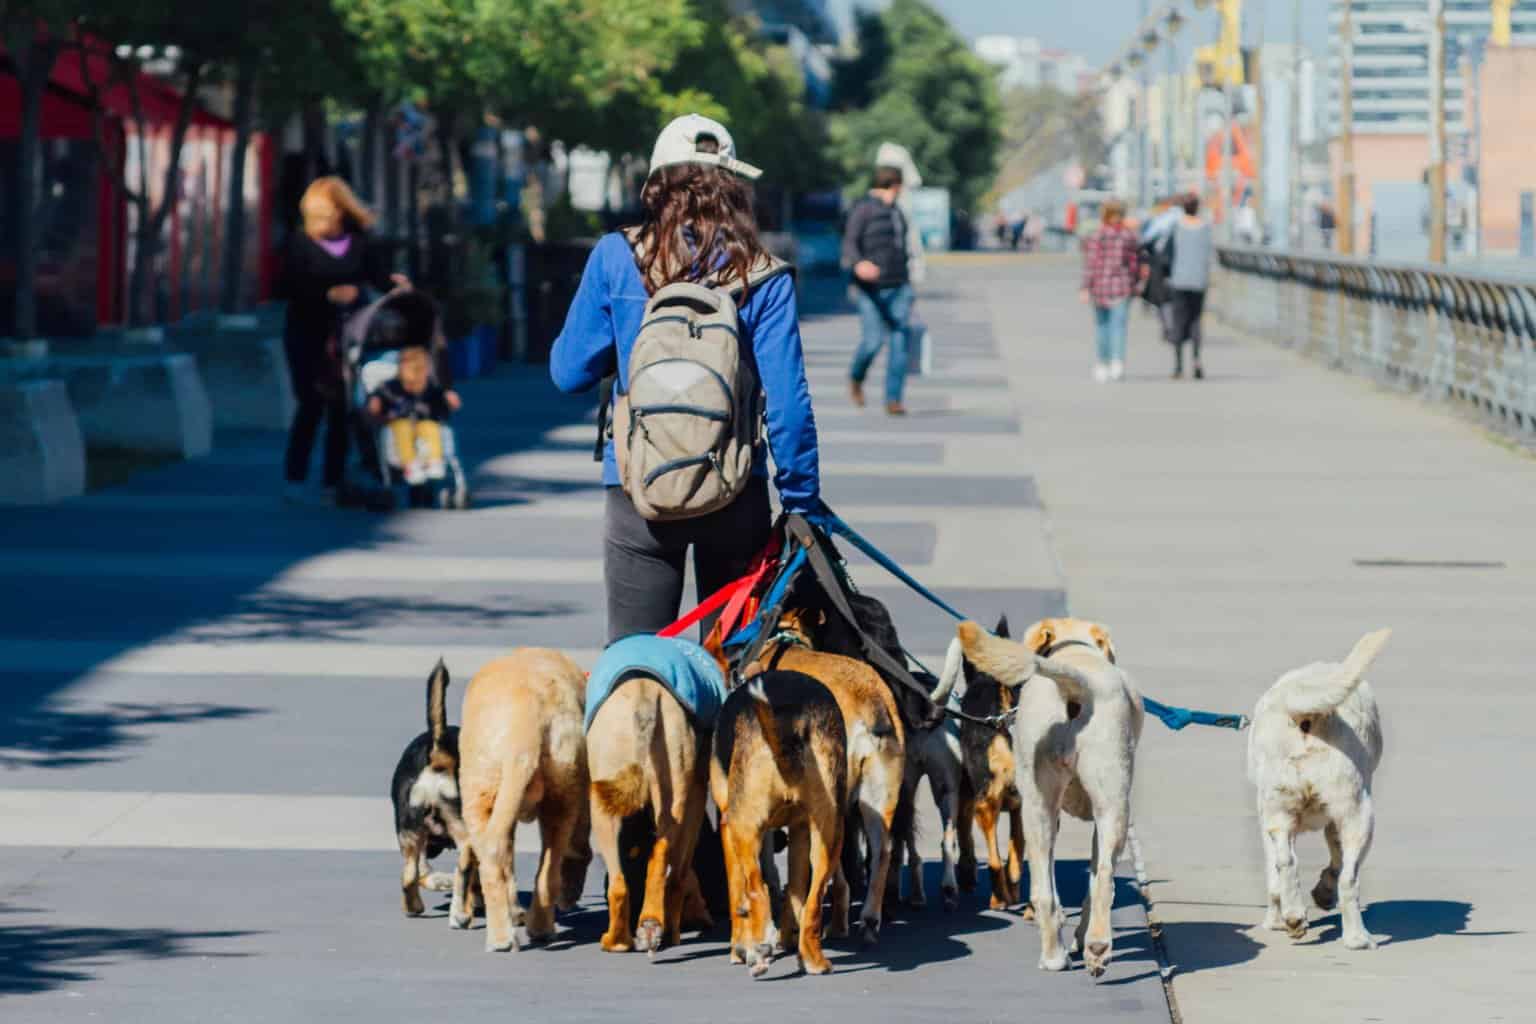 Dog walker with pack of dogs on busy city street. Market your dog walking business by establishing a social media presence and setting up a Google Business Profile so locals can easily find your company.